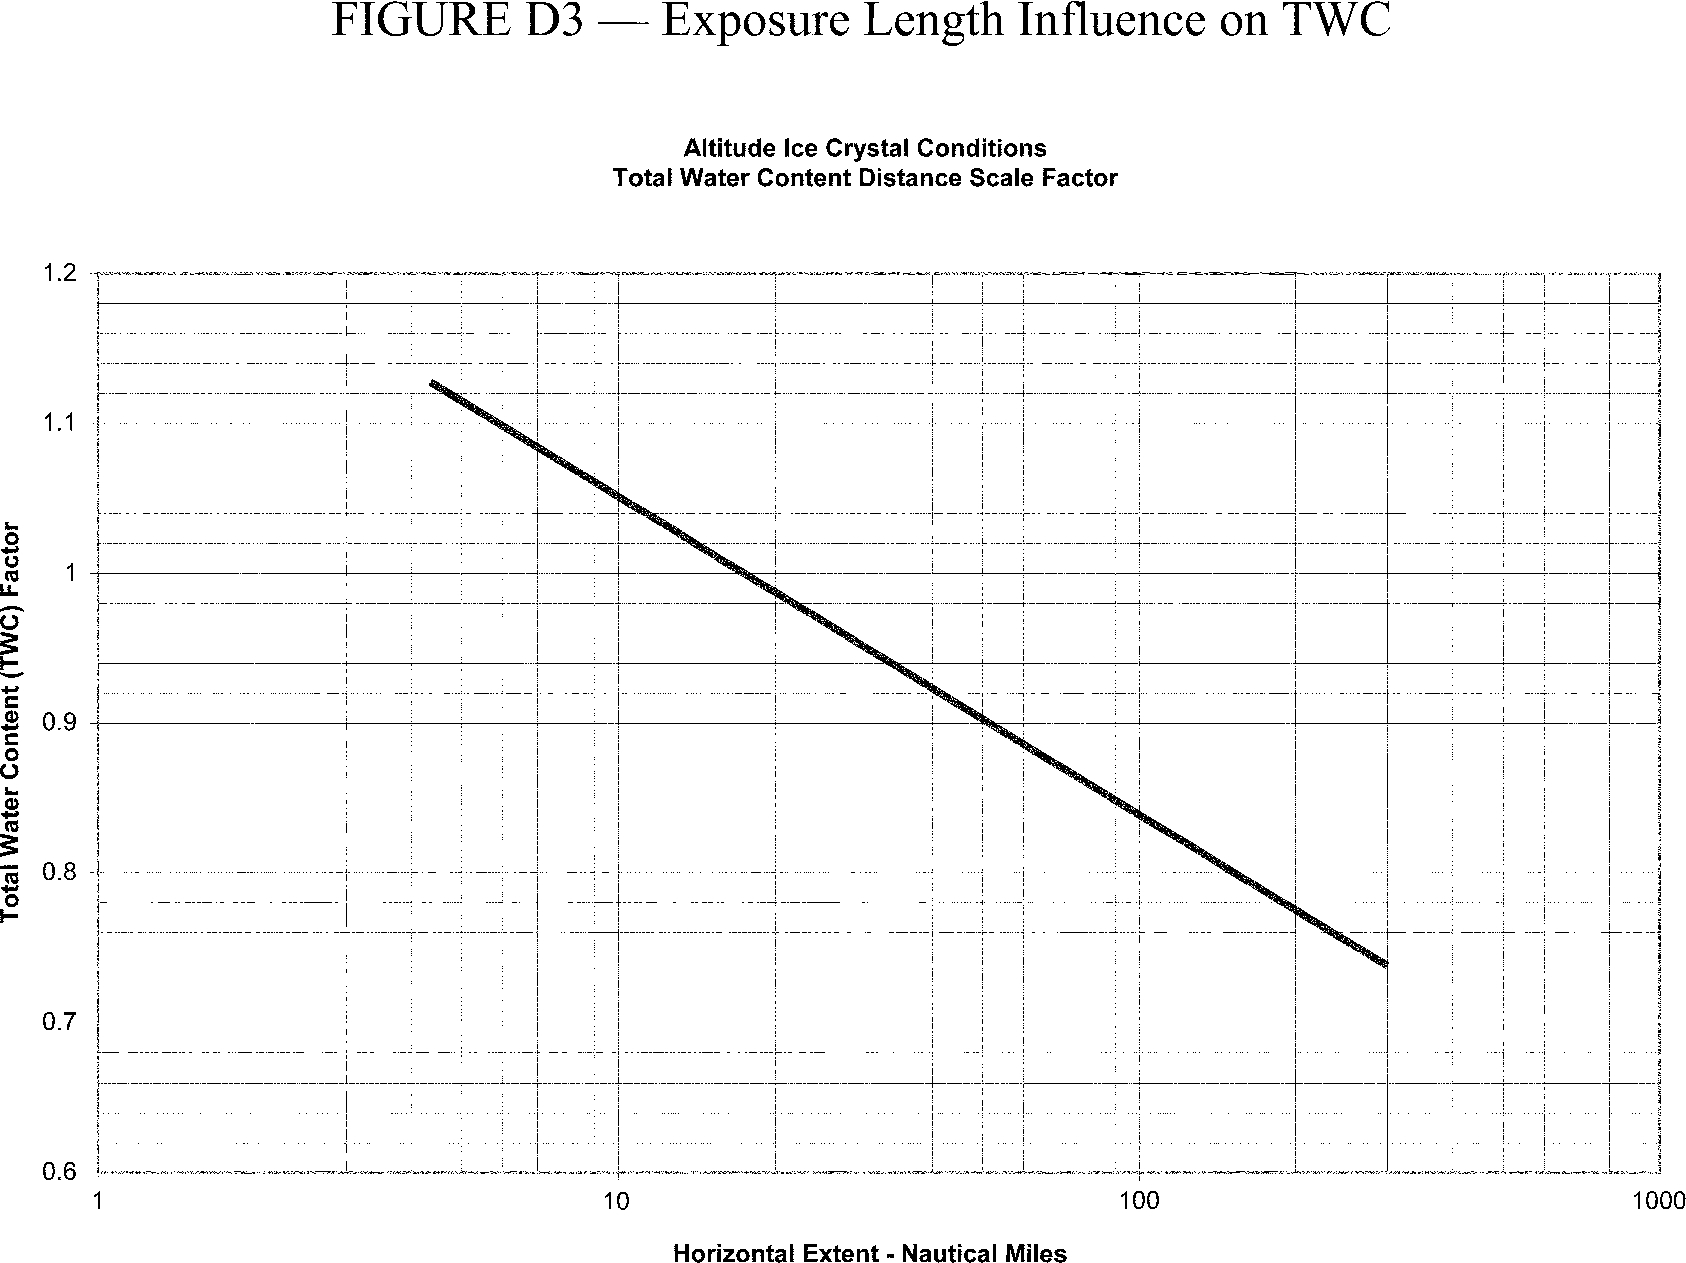 Graphic of The TWC levels displayed in Figure D2 of this Appendix represent TWC values for a standard exposure distance (horizontal cloud length) of 17.4 nautical miles that must be adjusted with length of icing exposure.